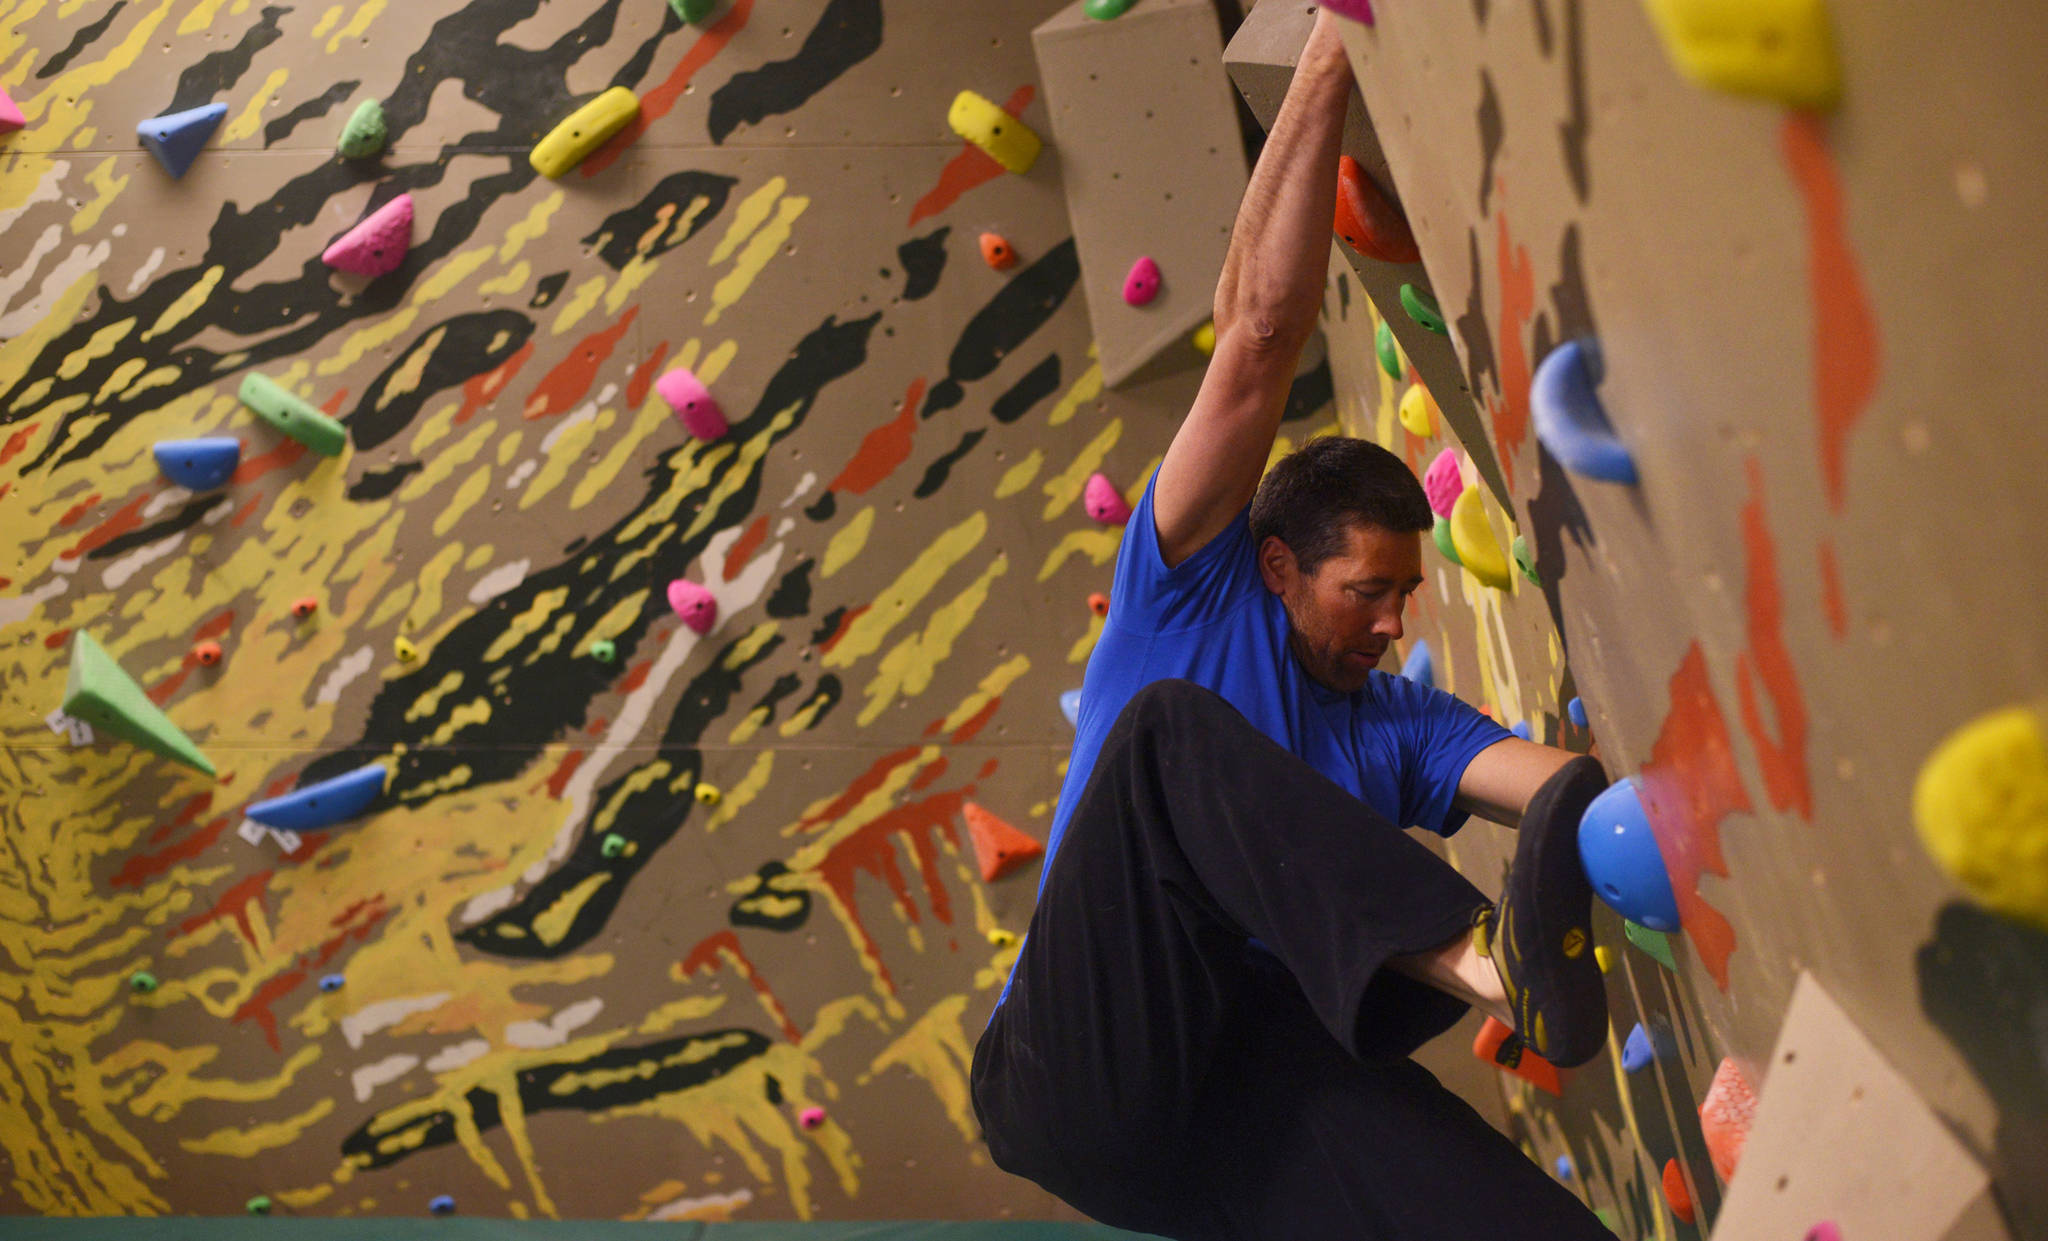 Nathan Beck works his way across a bouldering wall he co-designed, with Ed Schmitt, at the River City Wellness Center gym on Wednesday, March 29, 2017 in Soldotna, Alaska. The new wall, featuring stylized landscape art by Kaitlin Vadla, will have a grand opening on Saturday, April 8 from 4 p.m to 6 p.m. Admission will be $20.